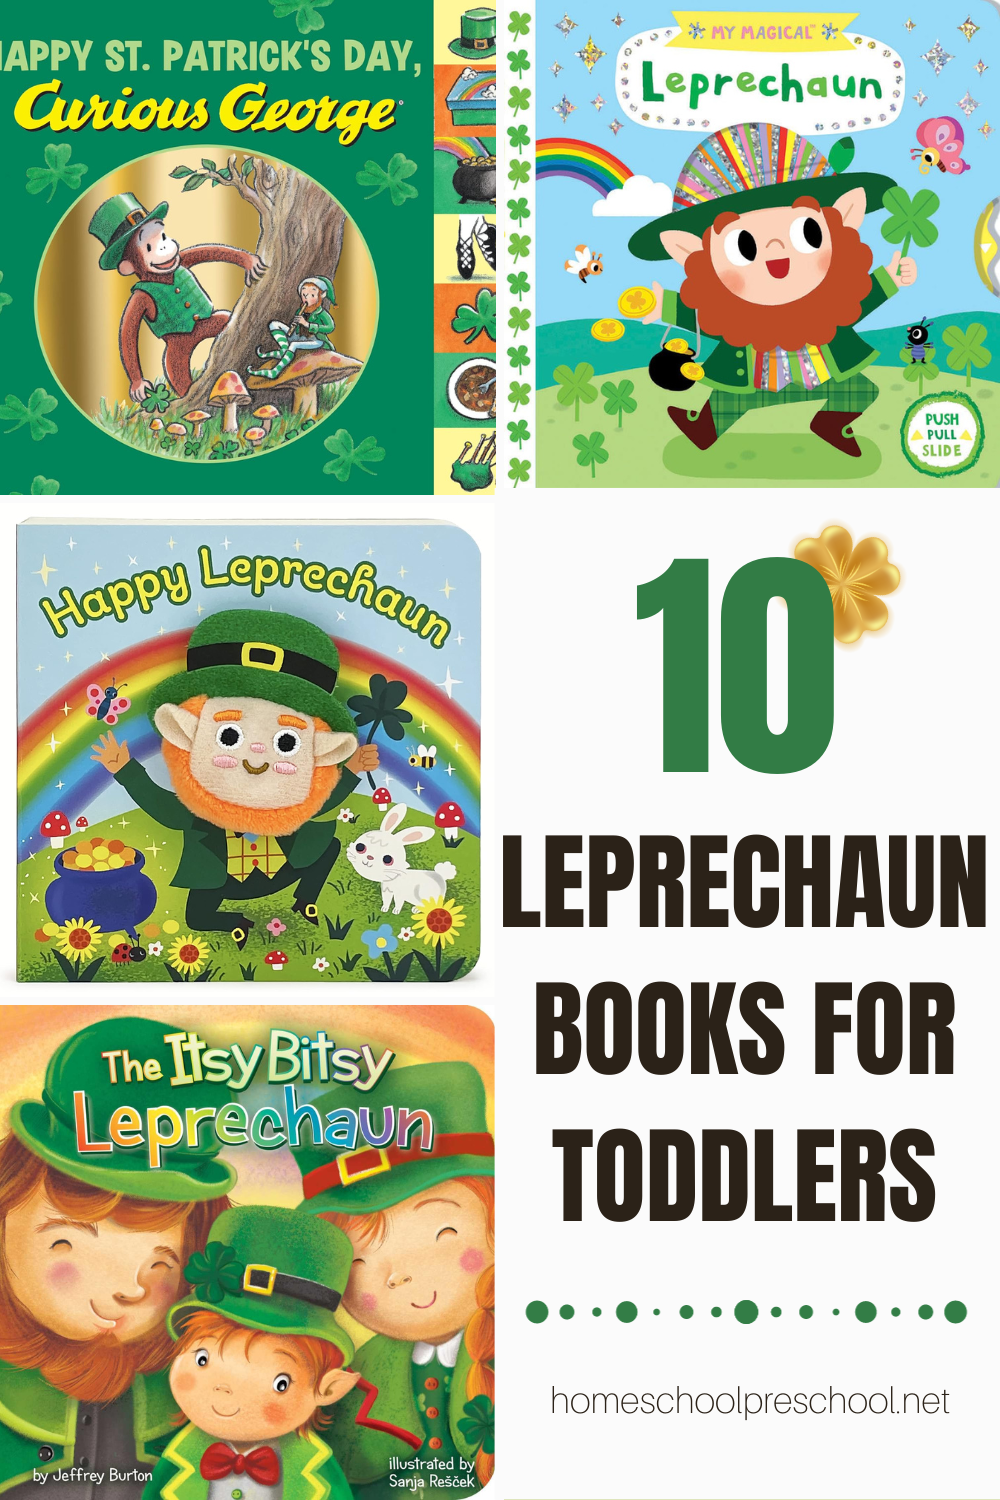 books-about-leprechauns Leprechaun Books for Toddlers